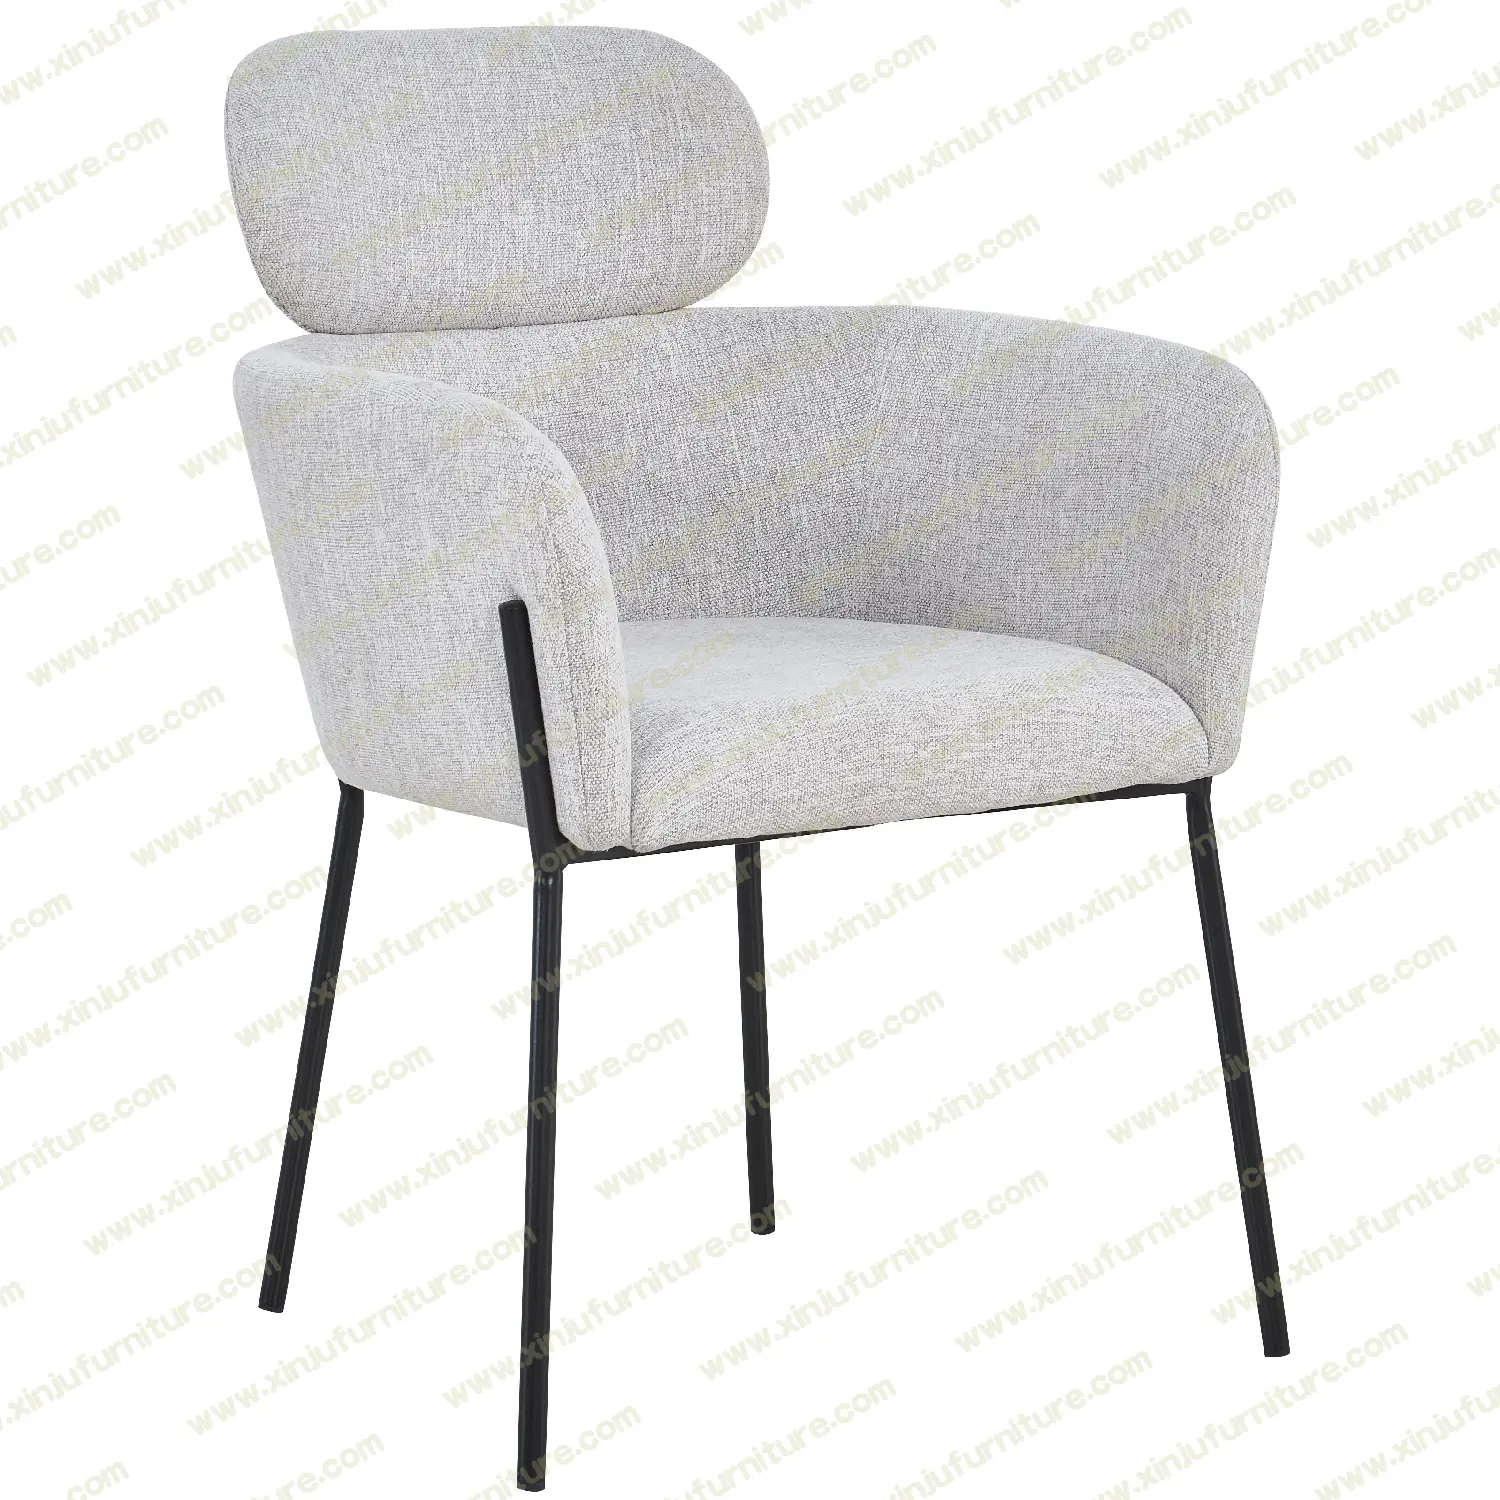 Comfortable living room leisure chair high backrest